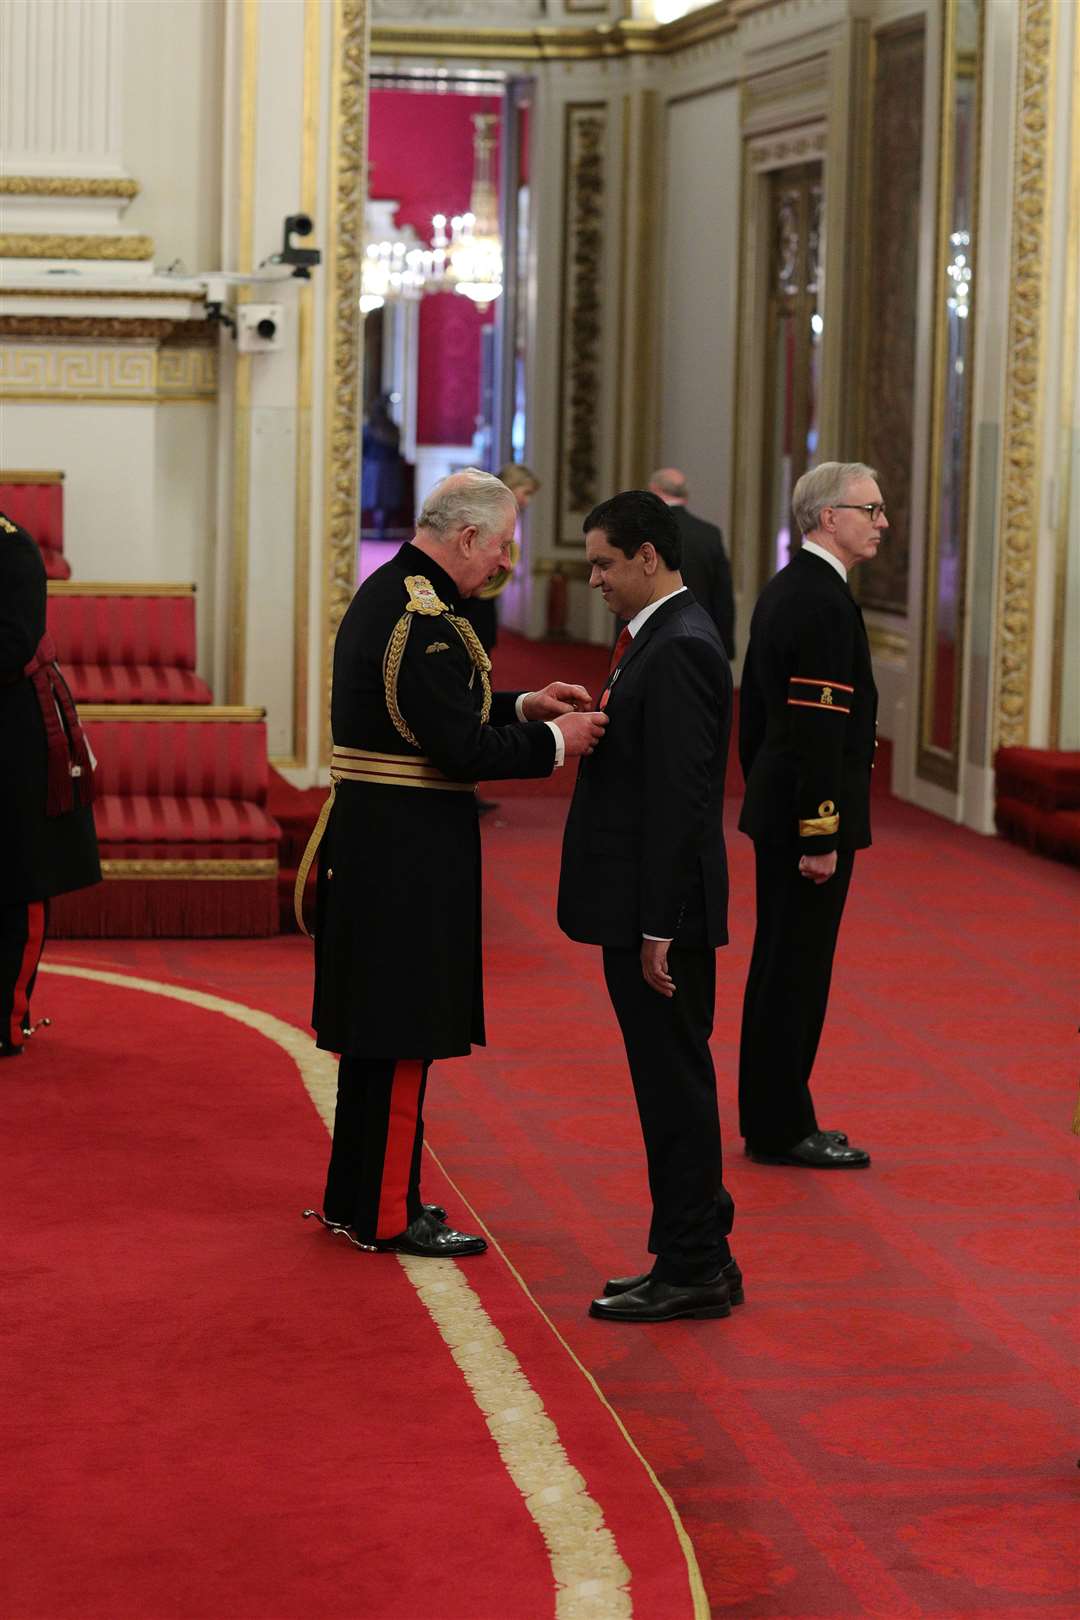 Dr Zahid Chauhan was made an OBE by the Prince of Wales for his work with homeless people (Yui Mok/PA)